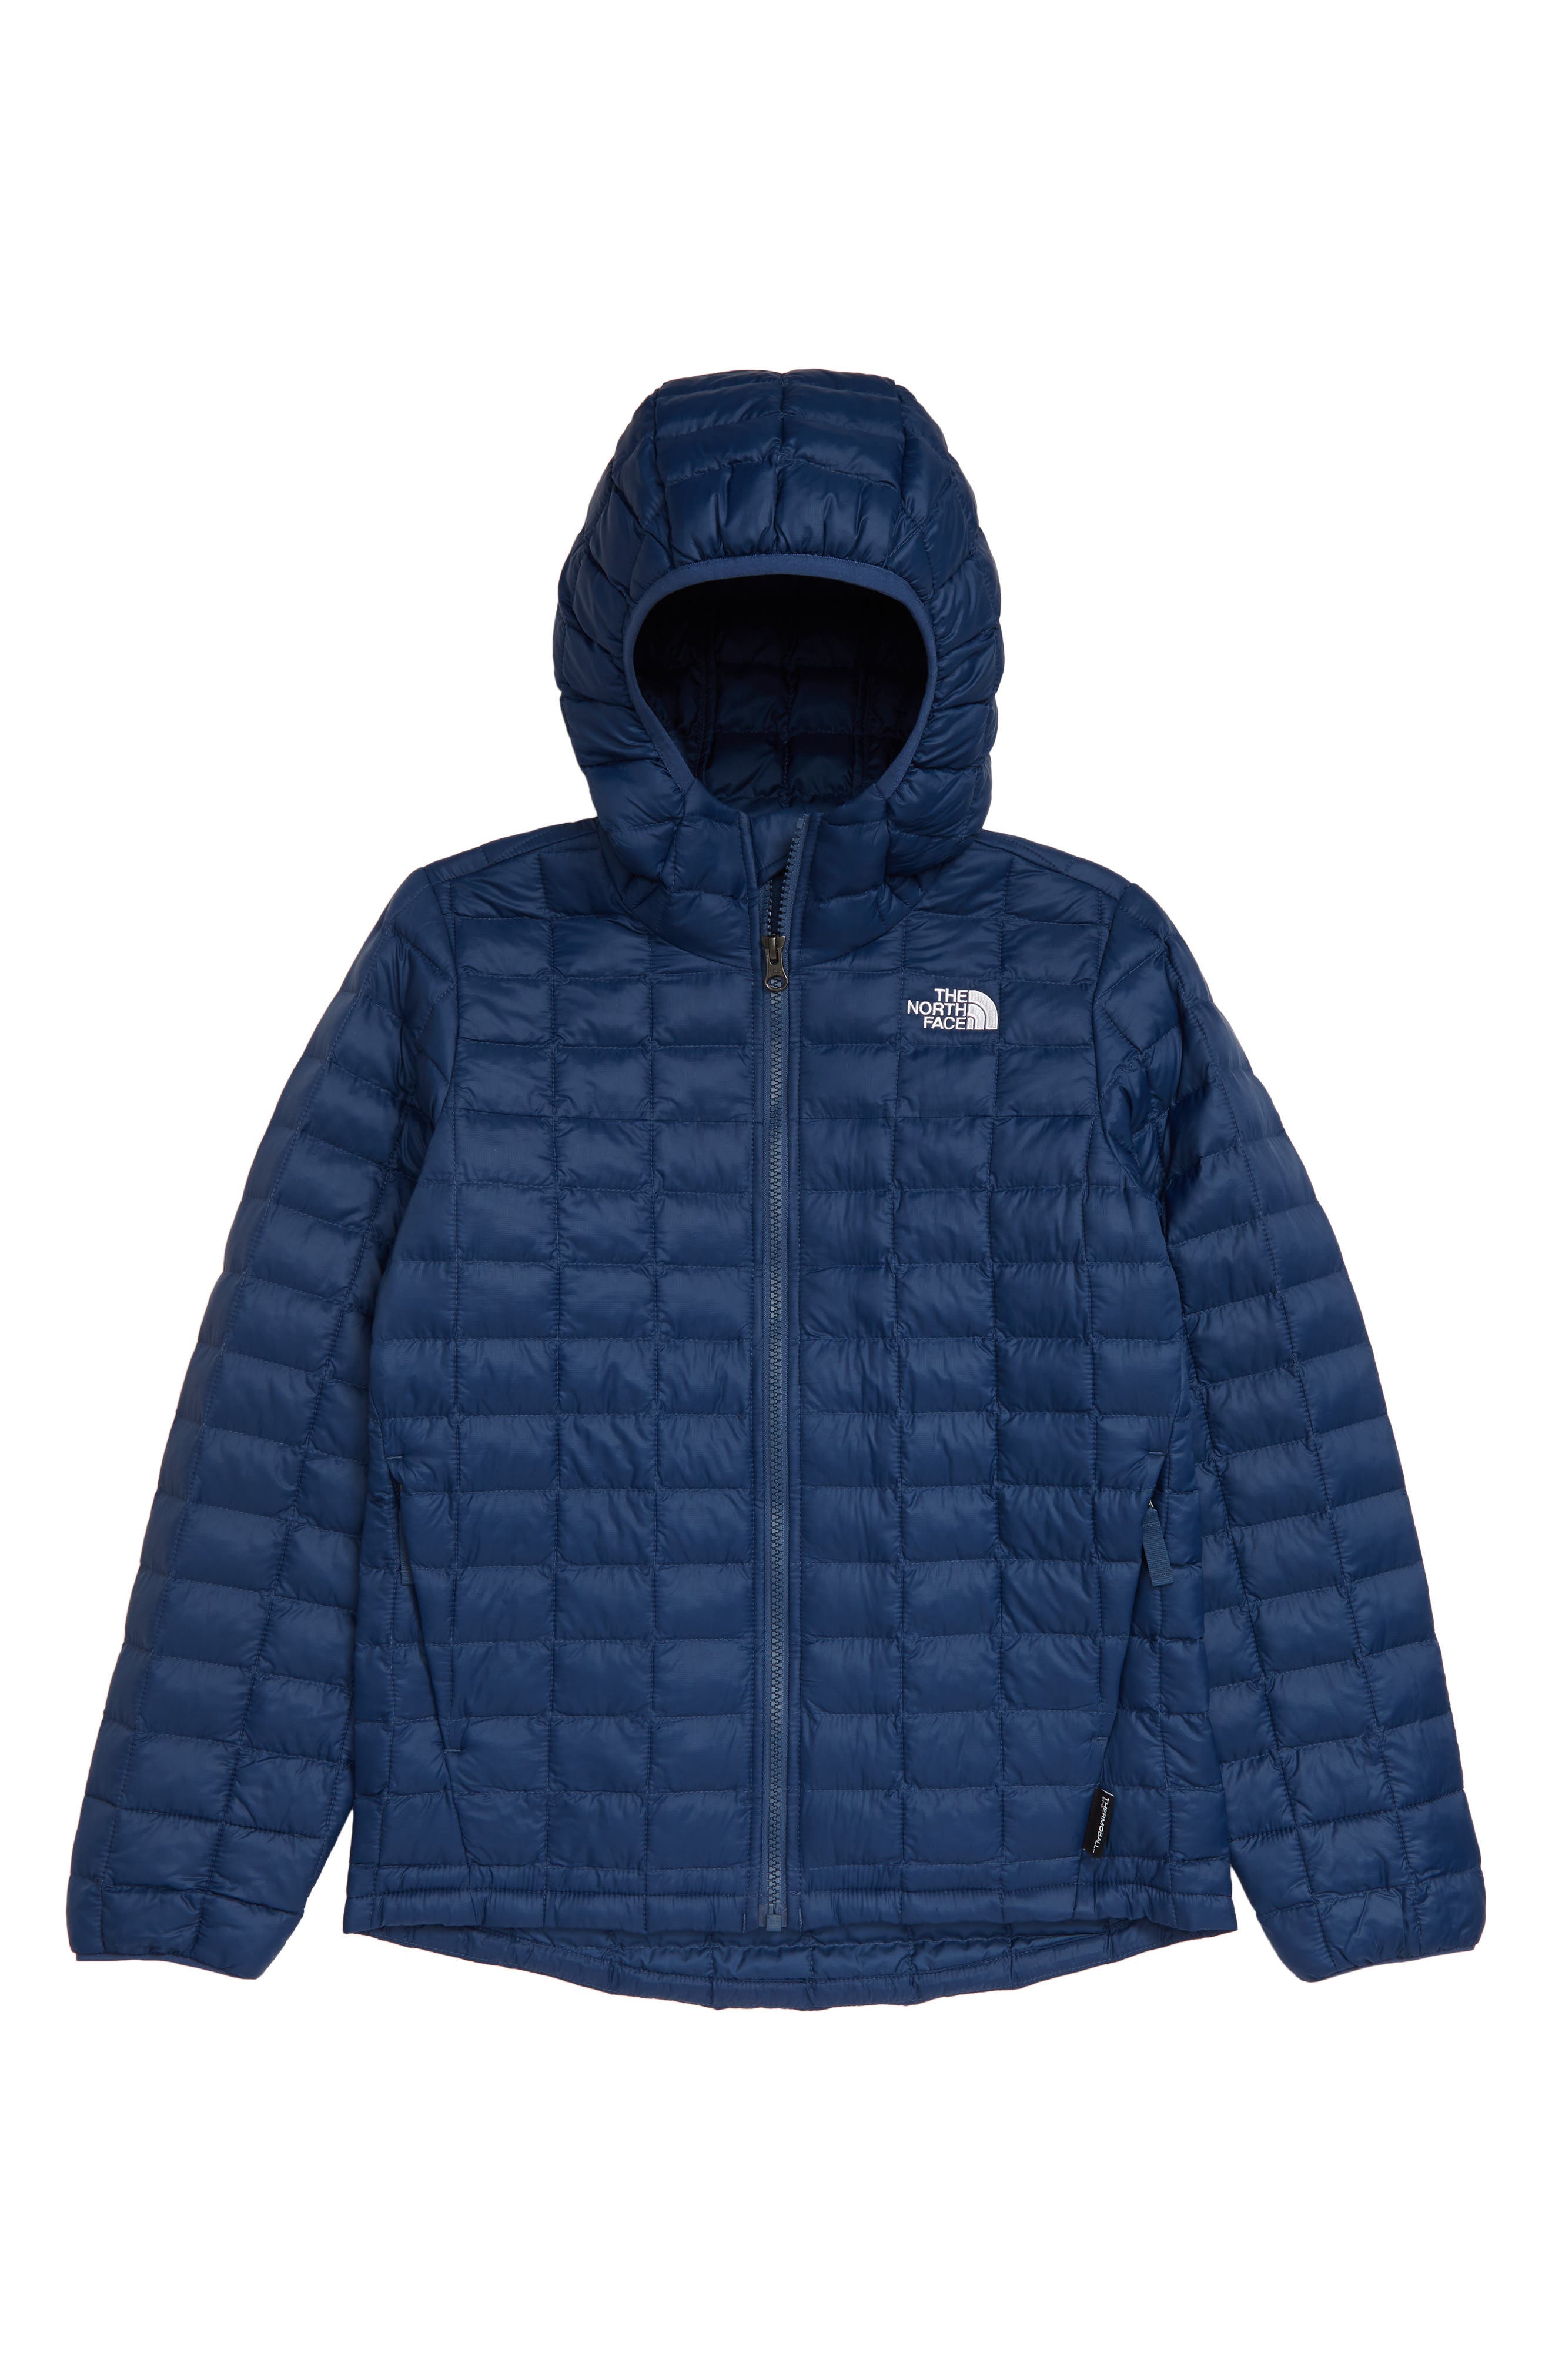 north face jacket clearance kids